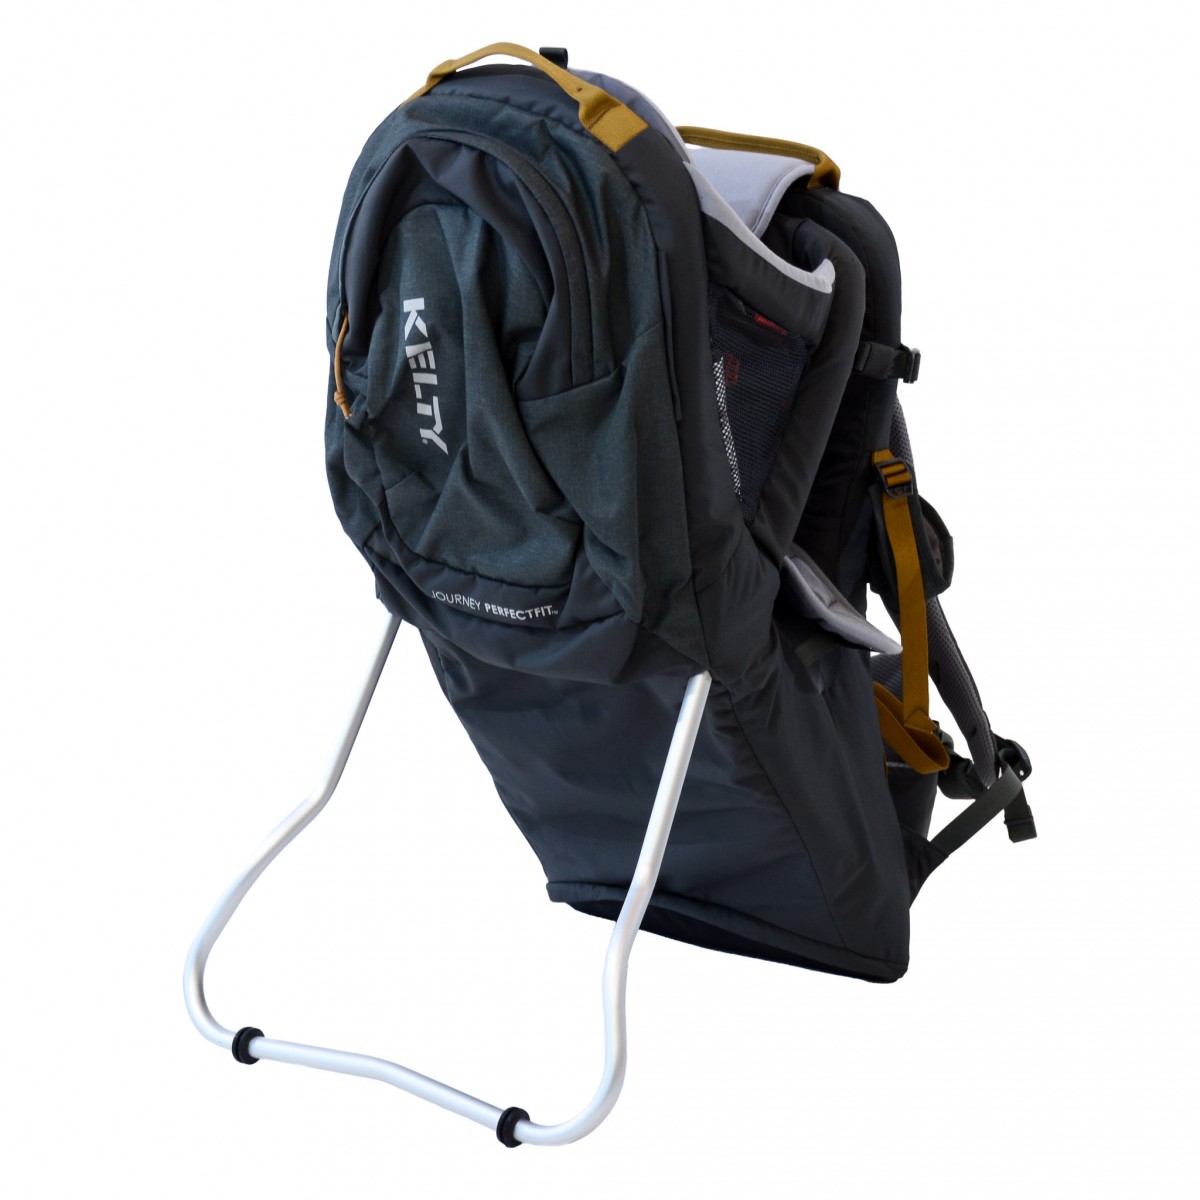 kelty journey perfectfit baby backpack review